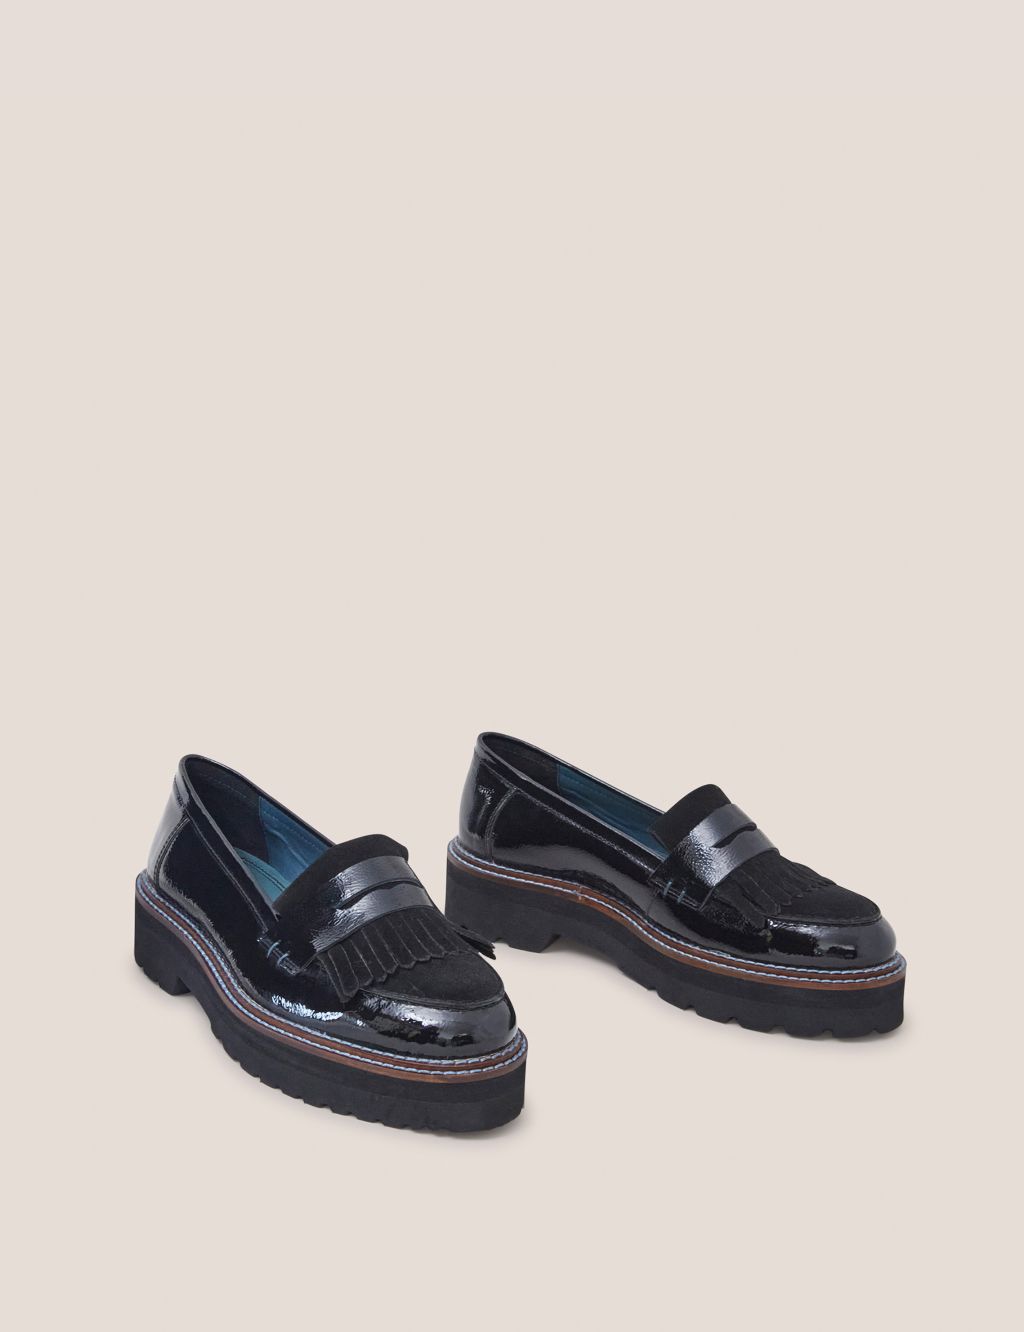 Leather Patent Slip On Block Heel Loafers image 2